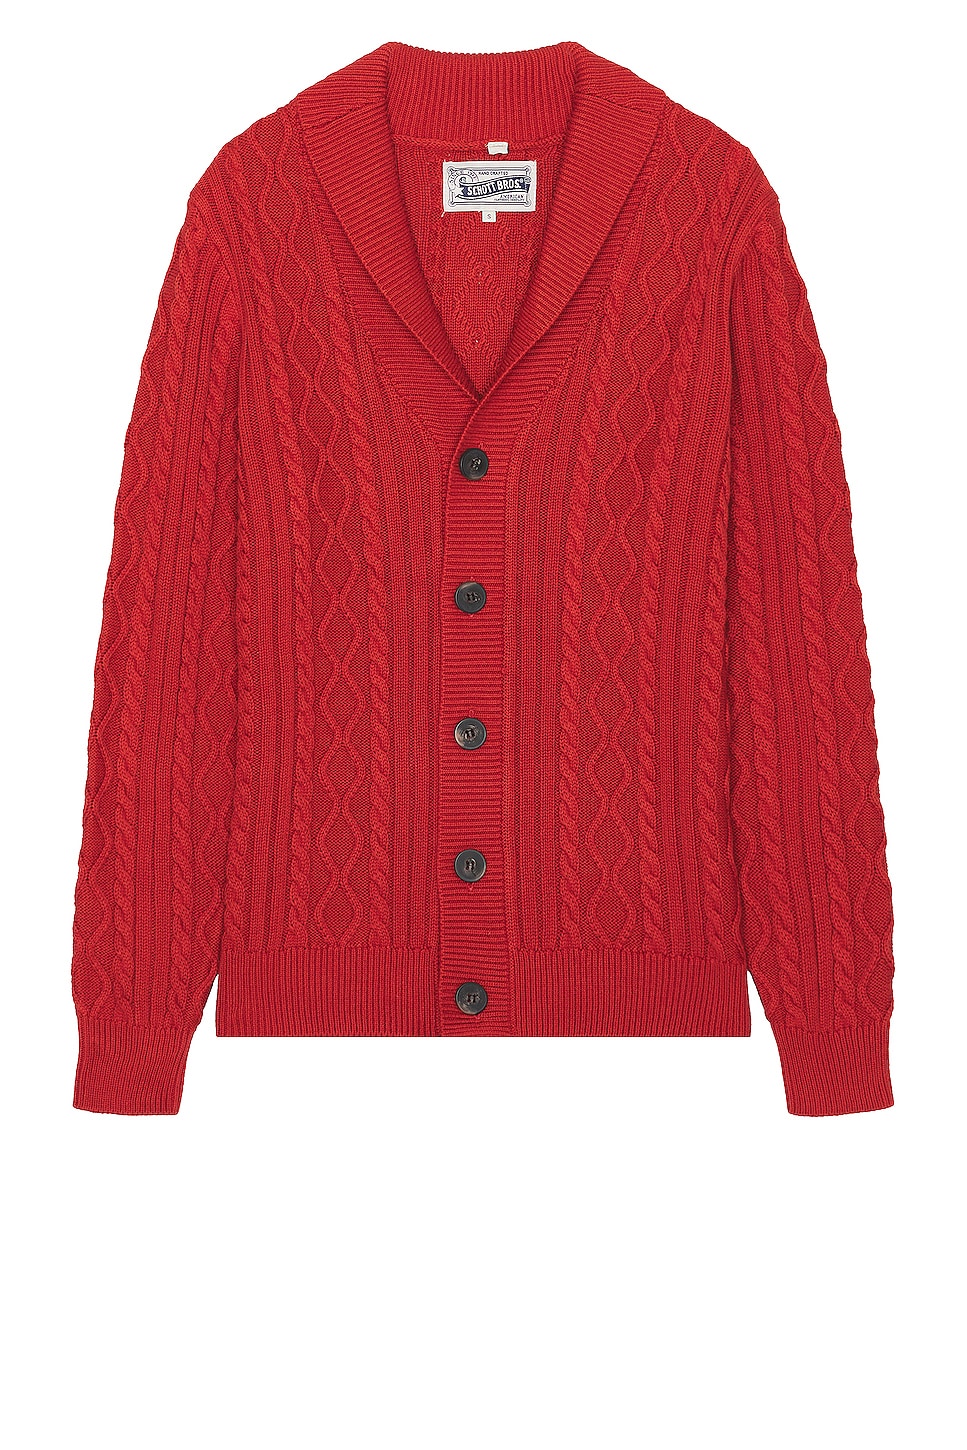 Image 1 of Schott Cableknit Cardigan in Whisky